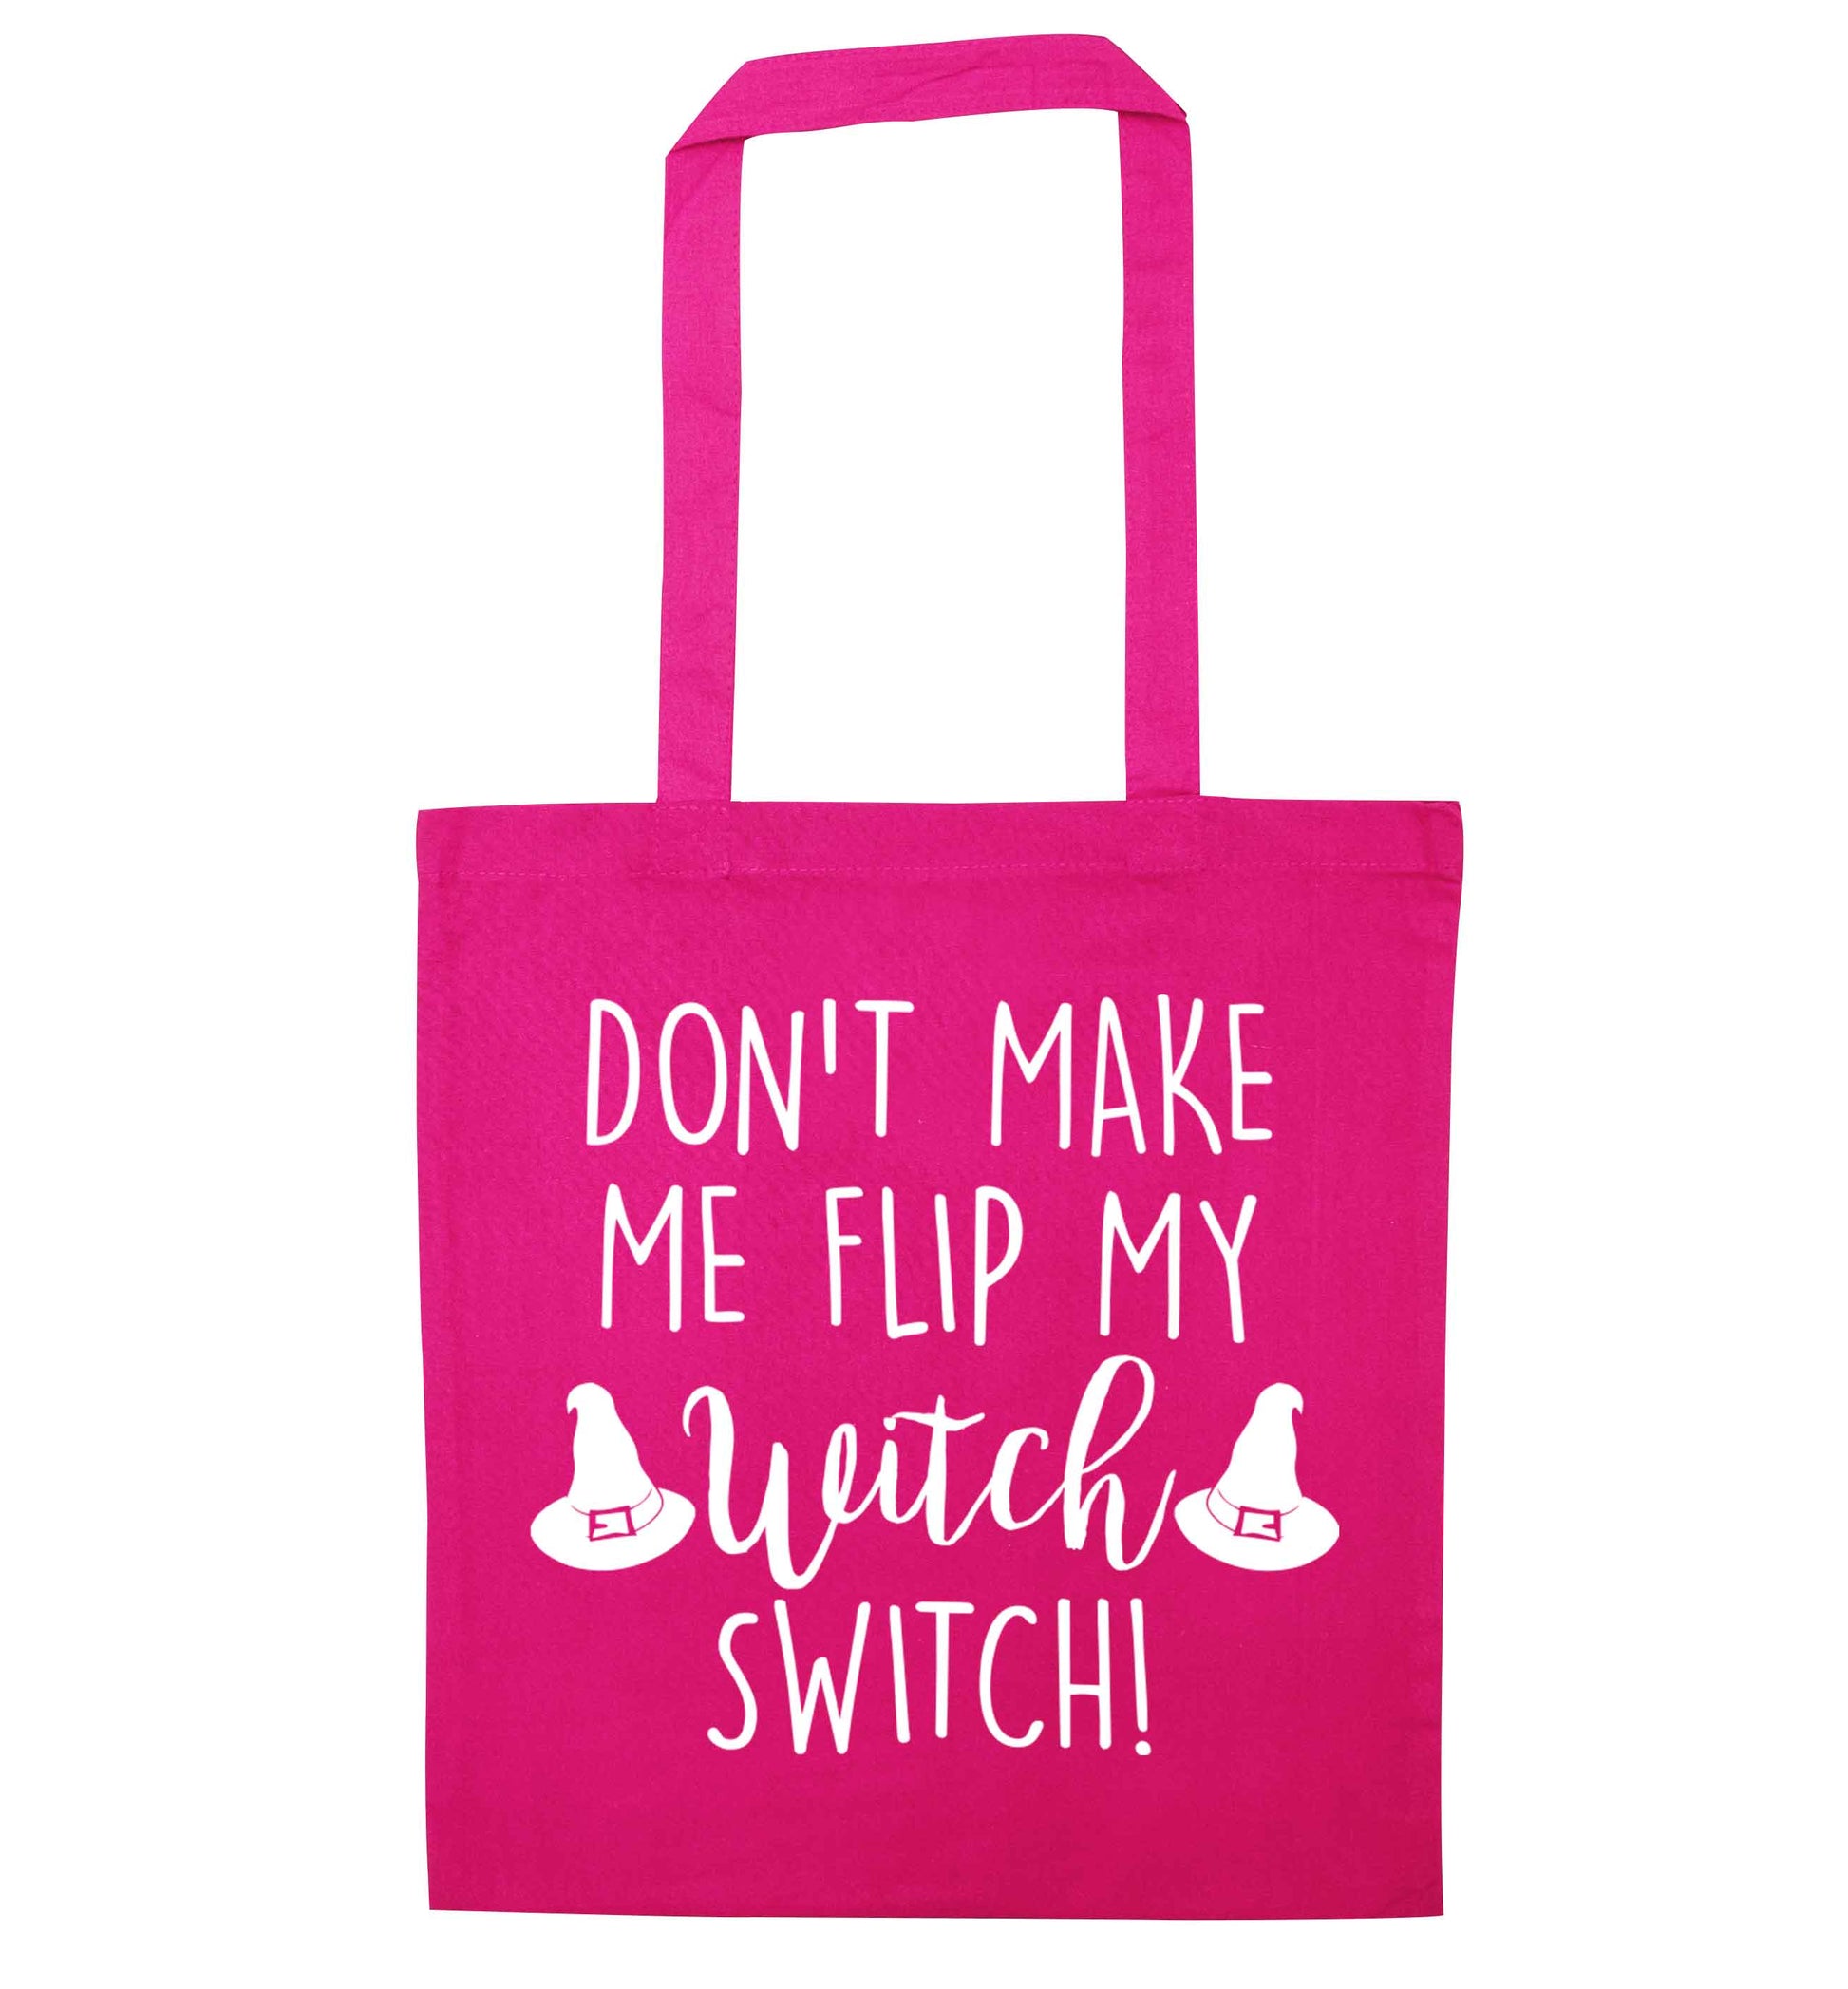 Don't make me flip my witch switch pink tote bag